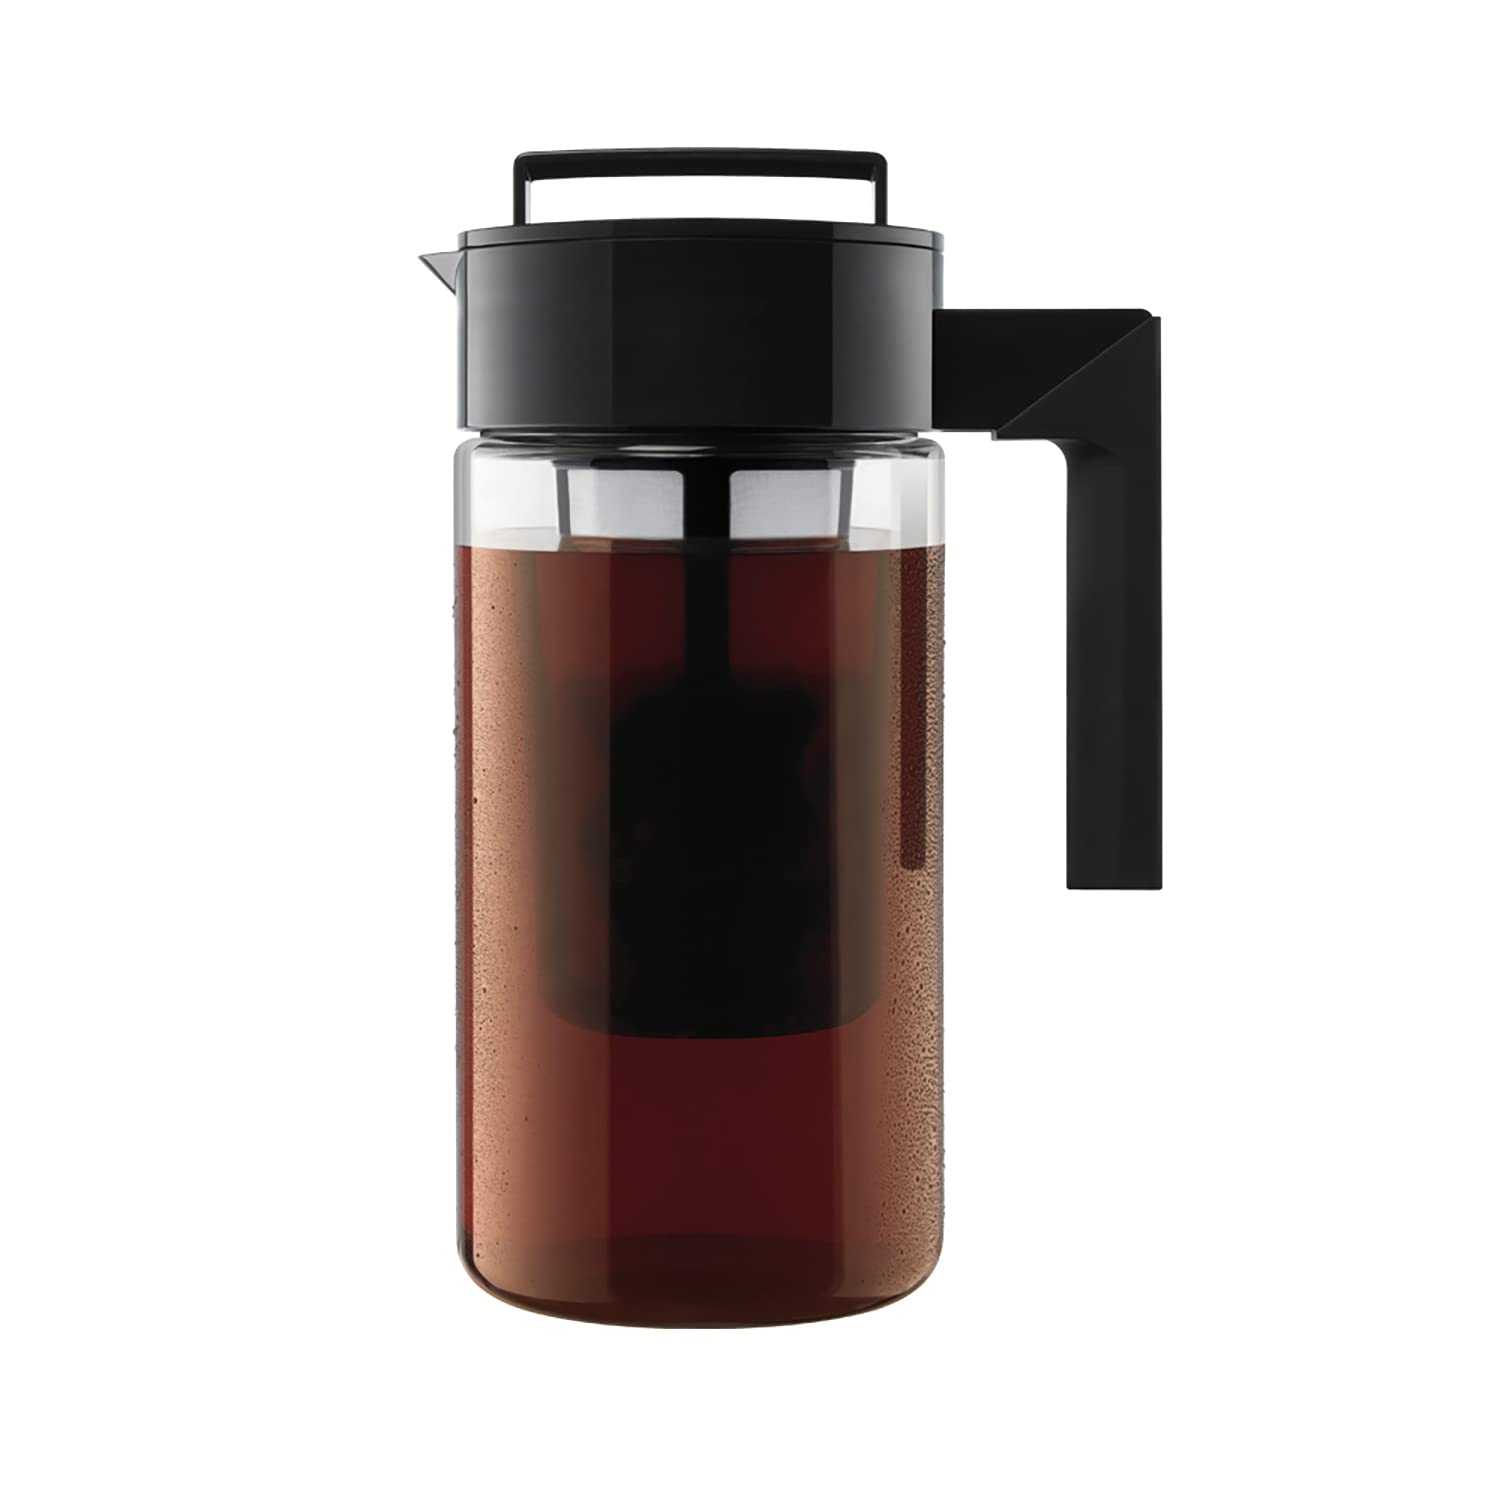 Coffee accessories seeing sales for National Coffee Day